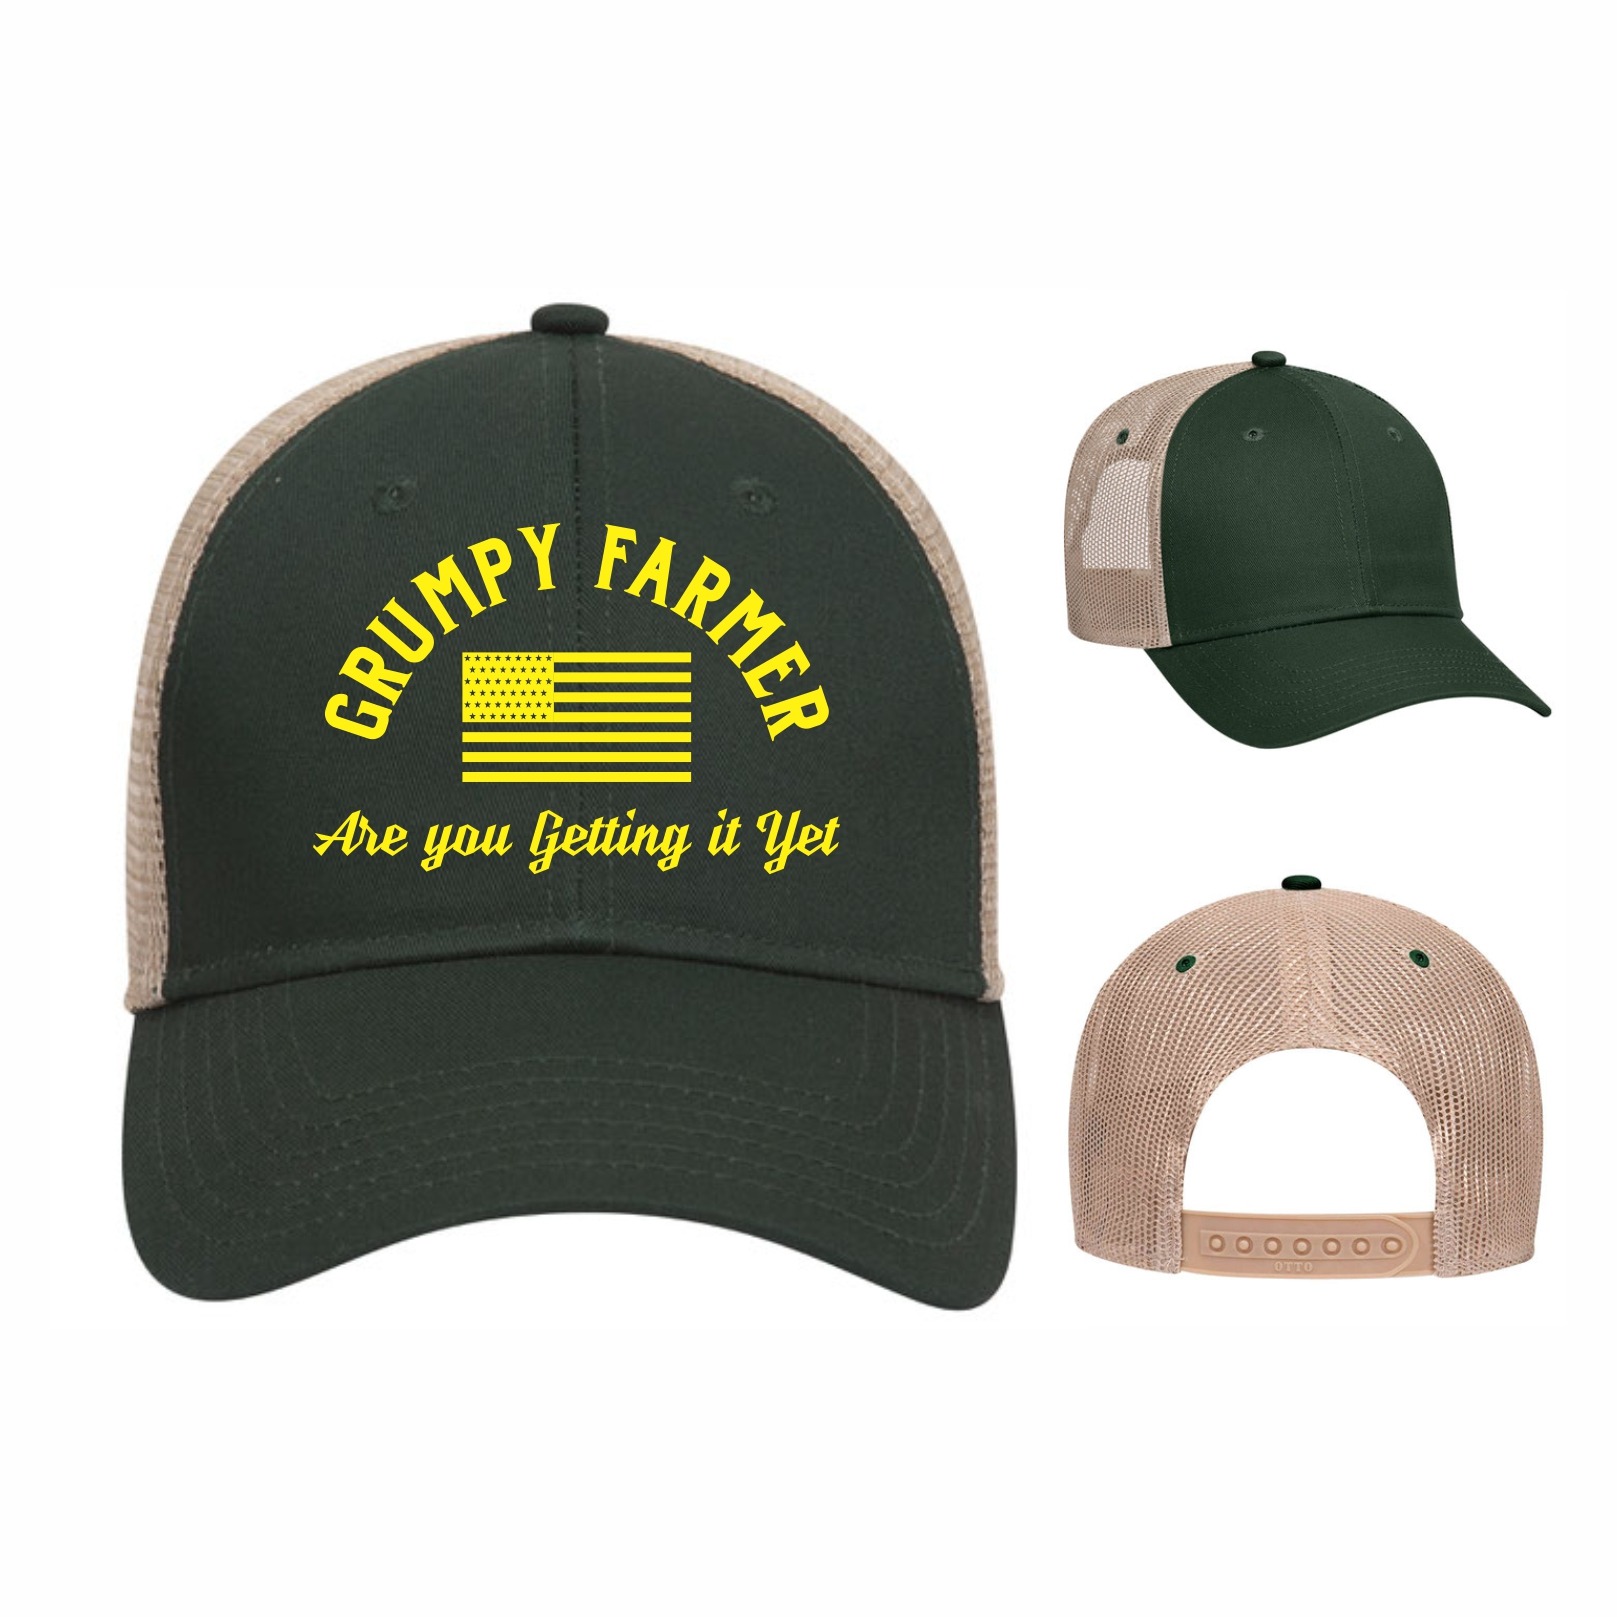 Image of GRUMPY FARMER ARE YOU GETTING IT YET HATS